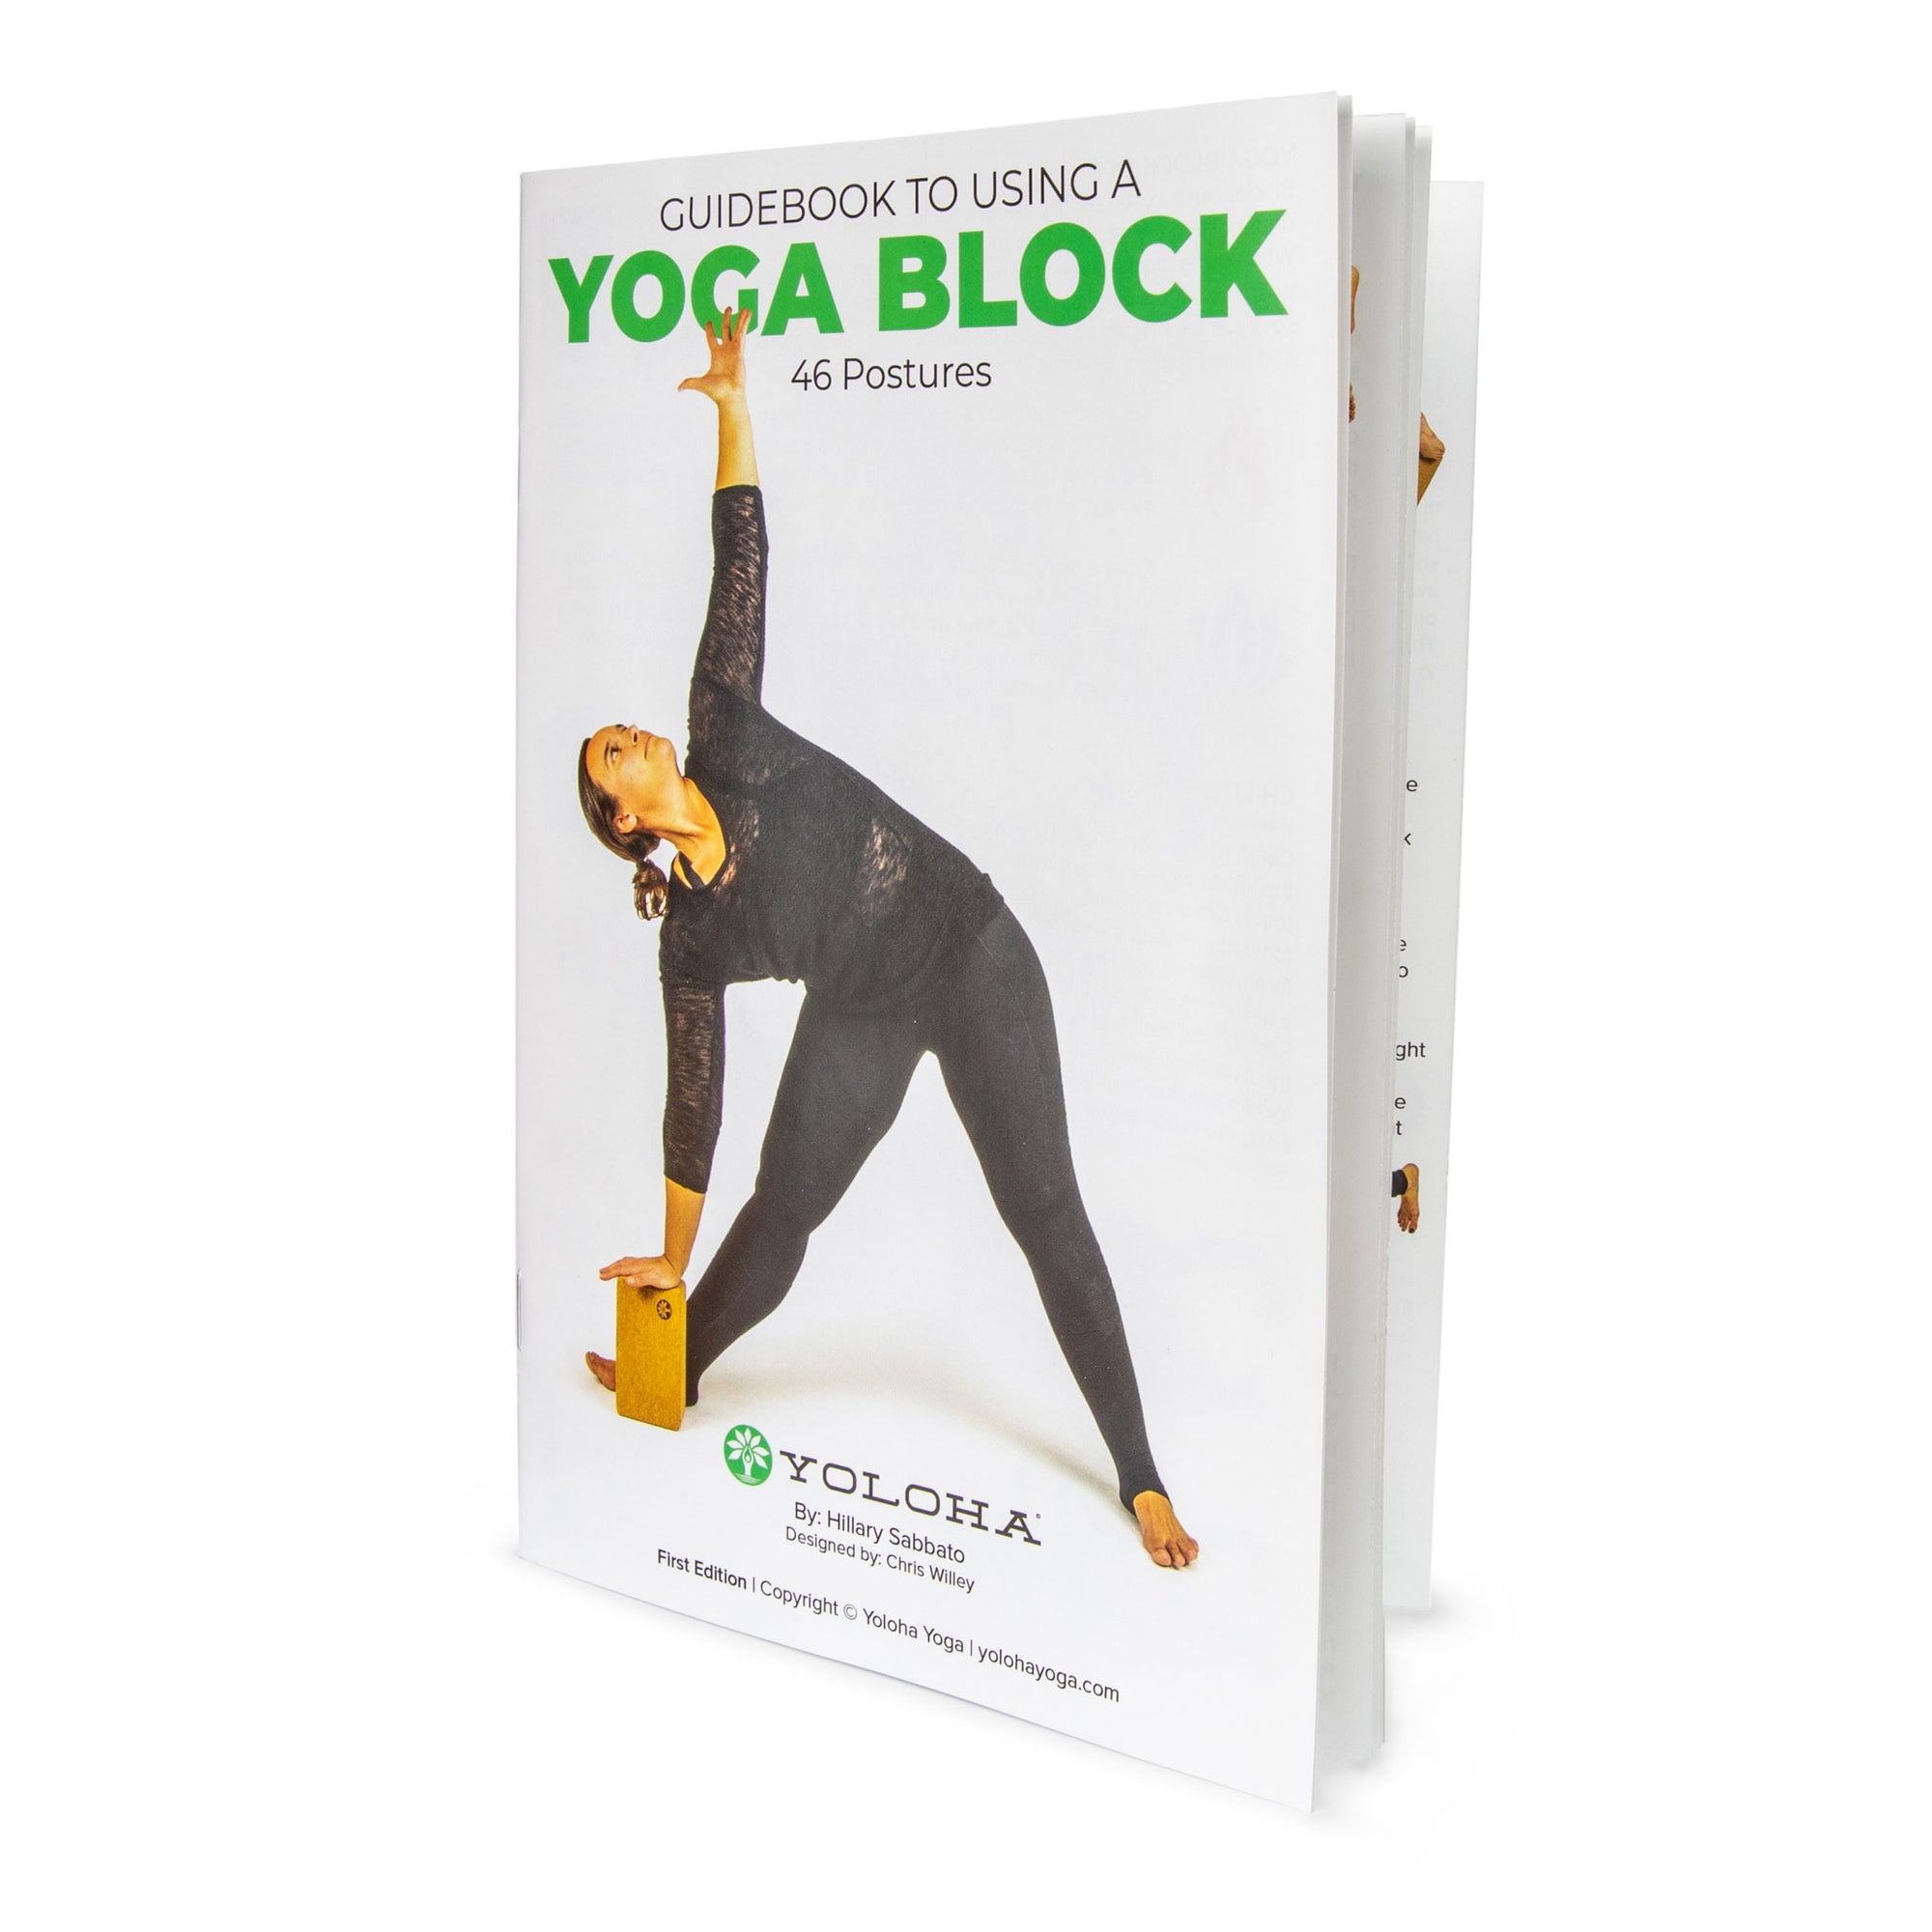 Buy Om Yoga In A Box Couples Book